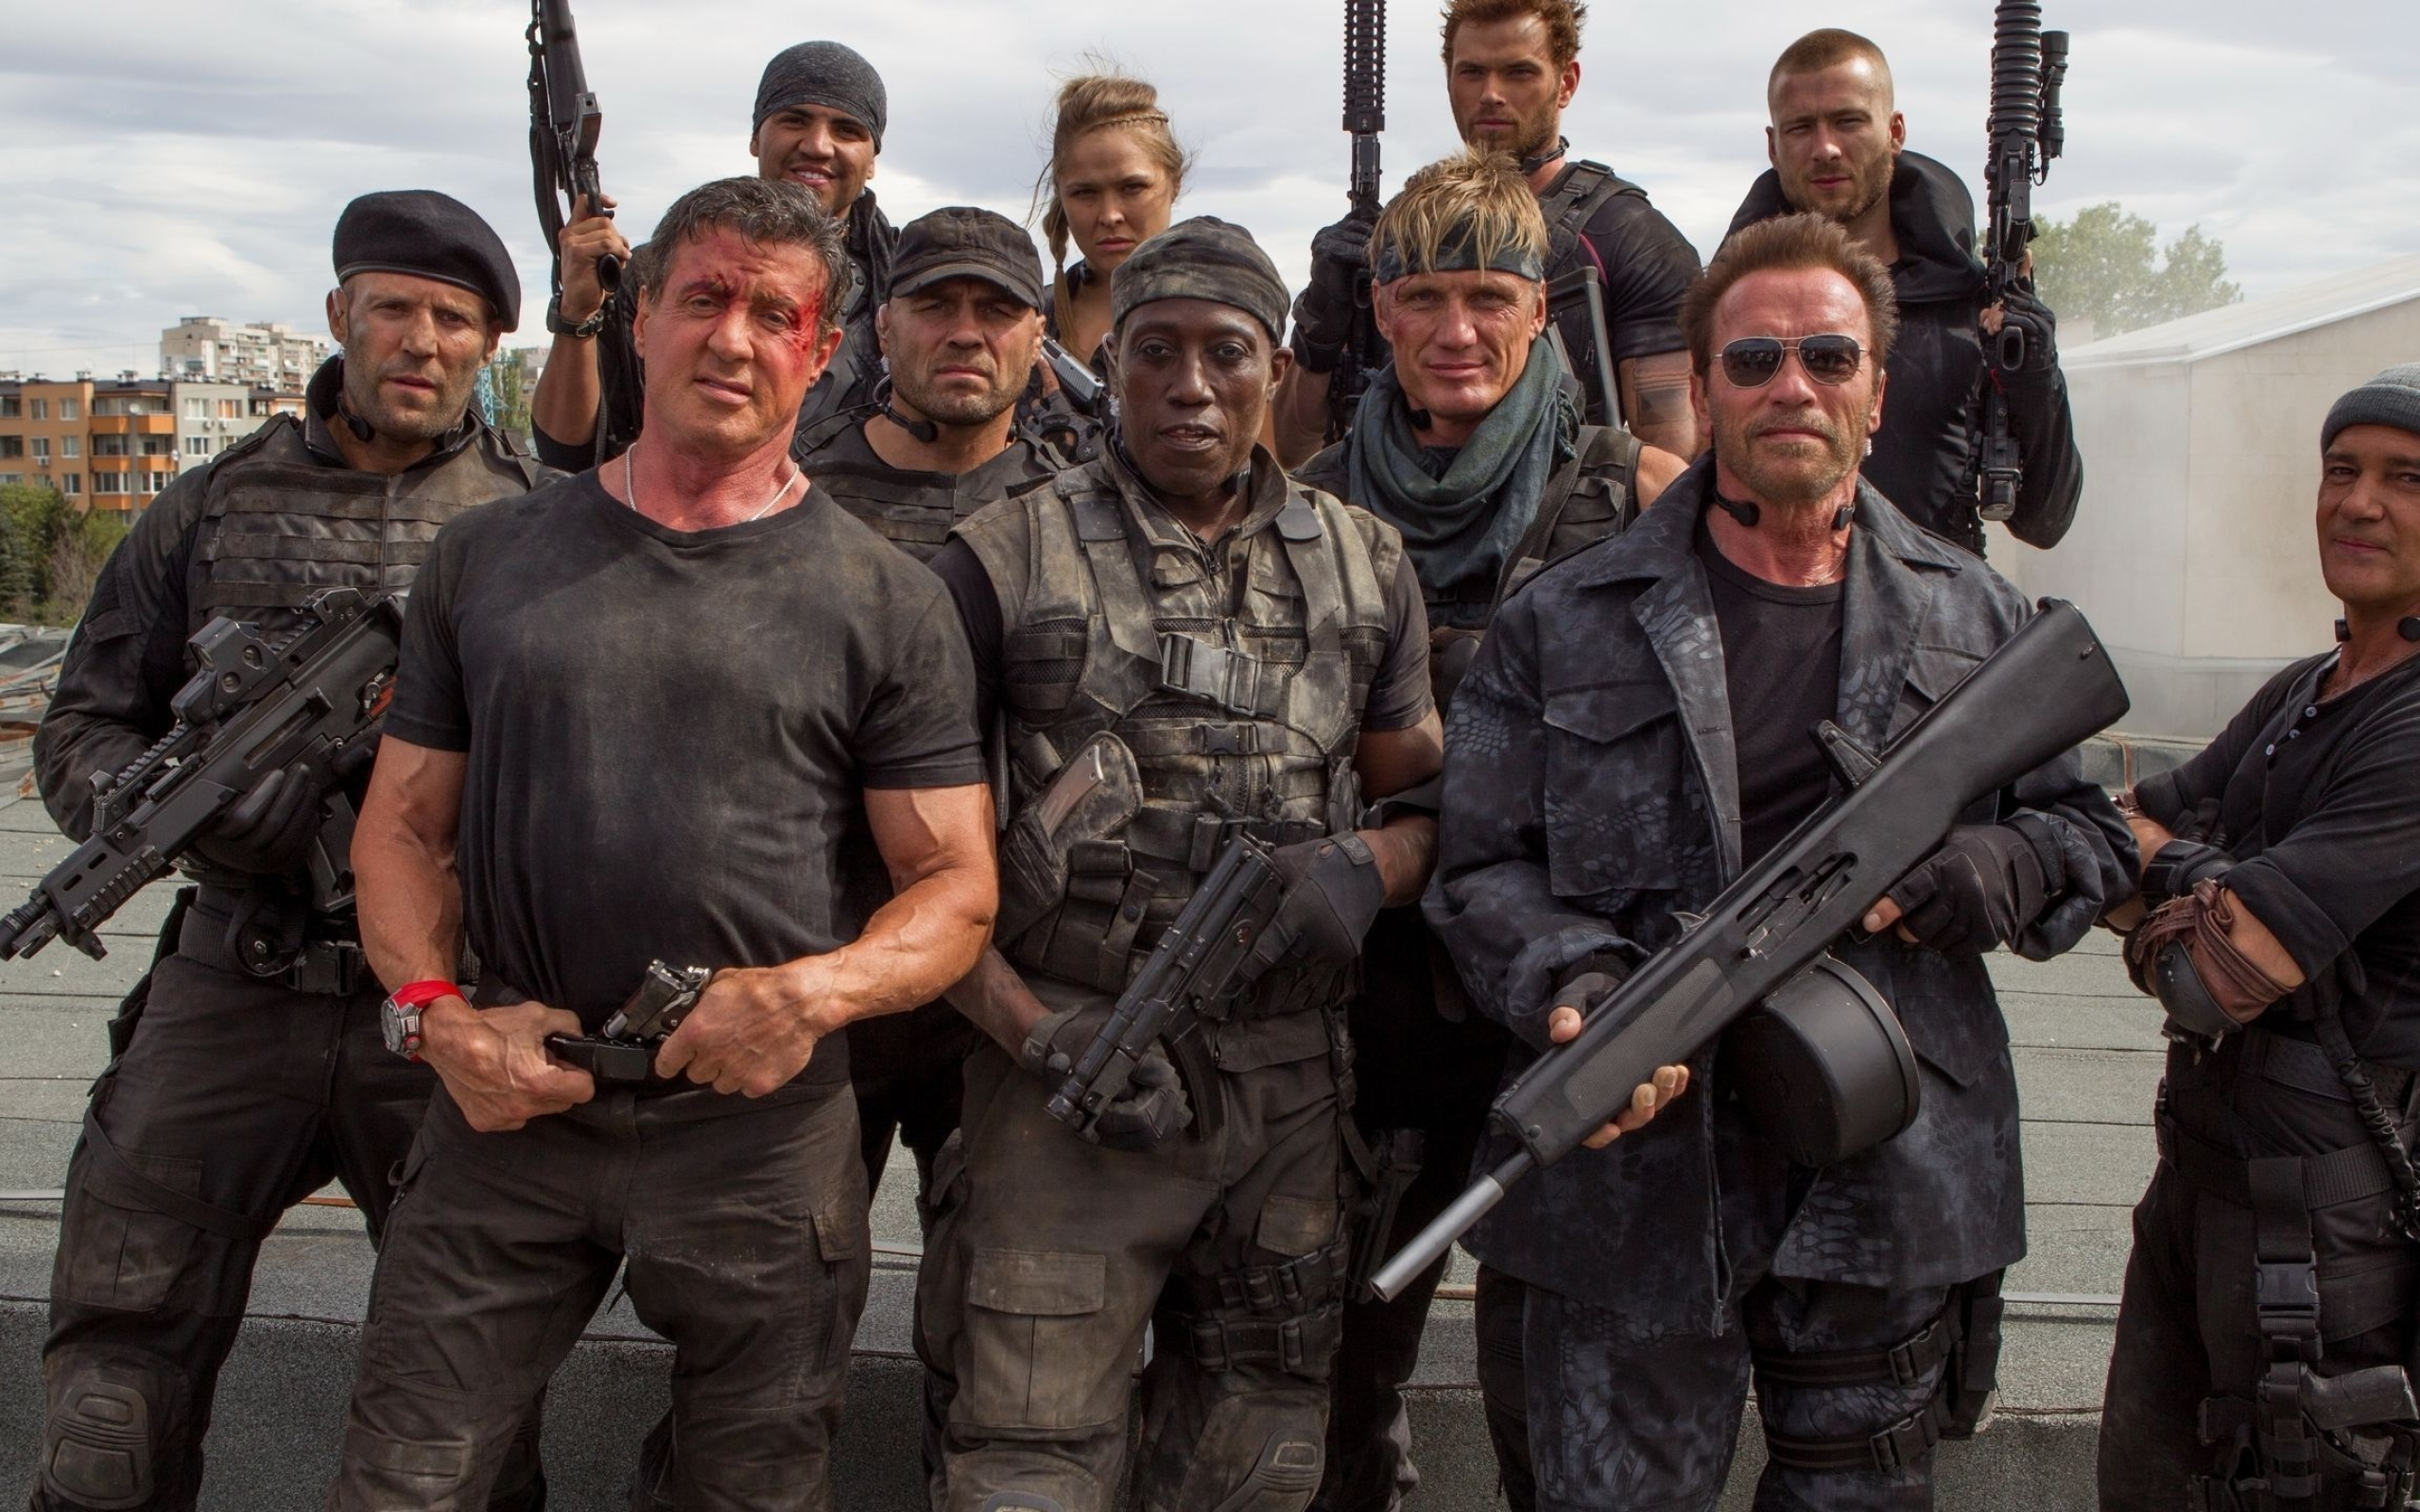 The Expendables 3 main characters, Movie wallpapers, Star-studded cast, High-octane action, 2560x1600 HD Desktop